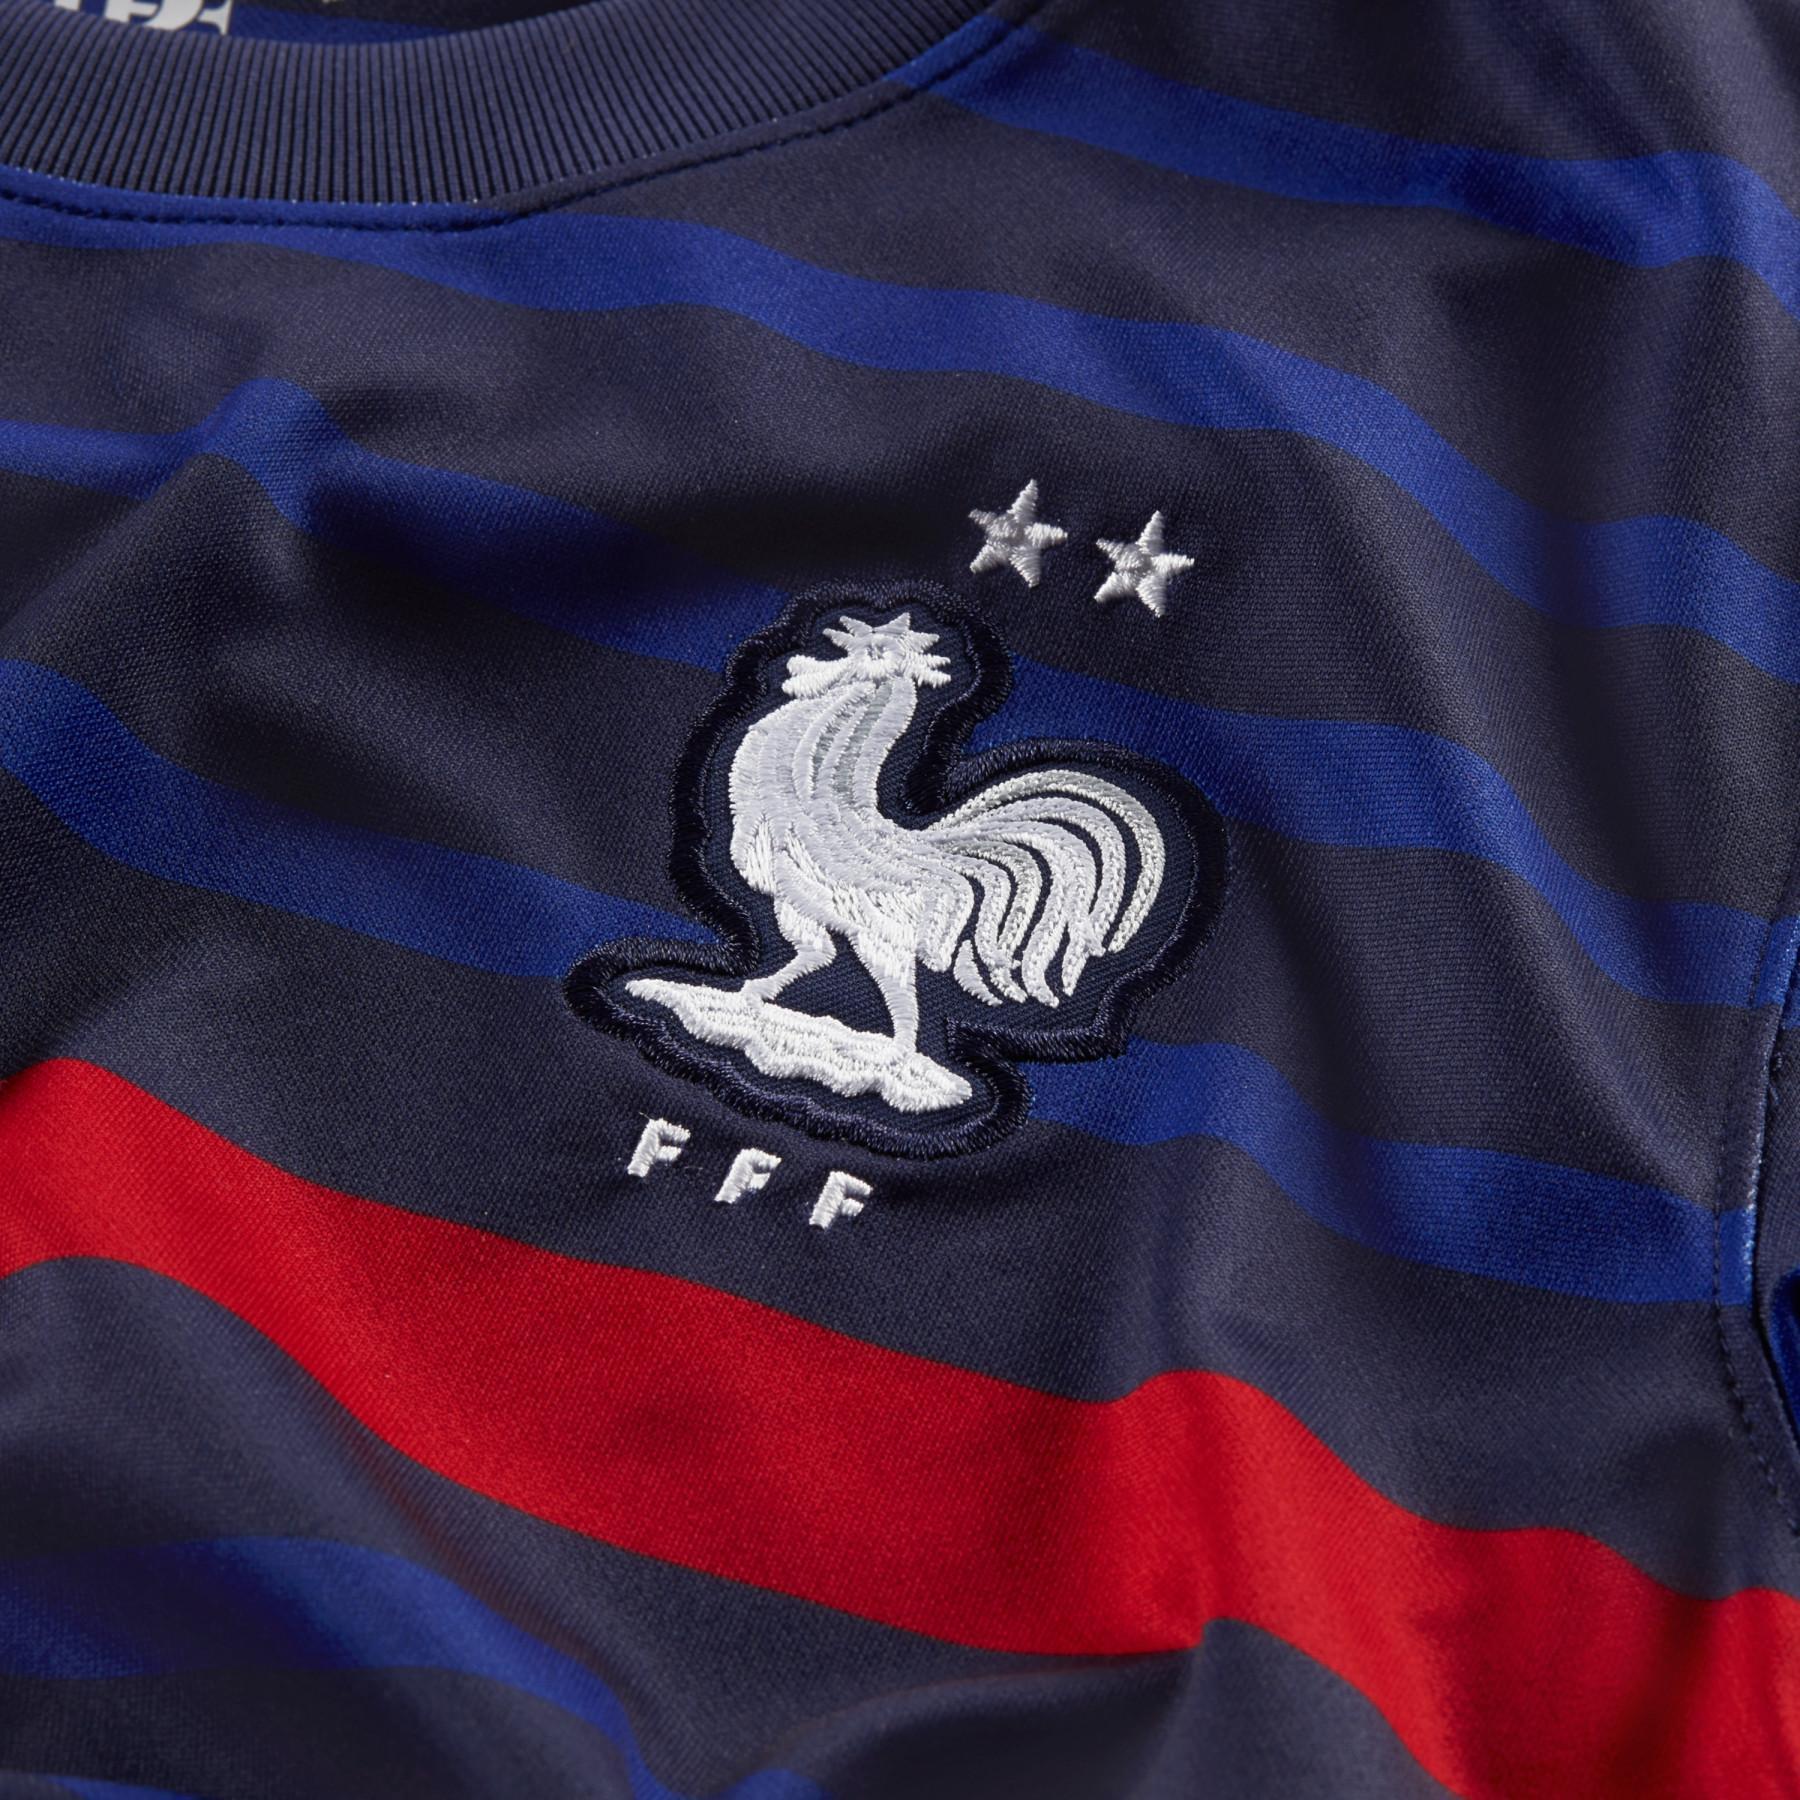 Home jersey child France 2020